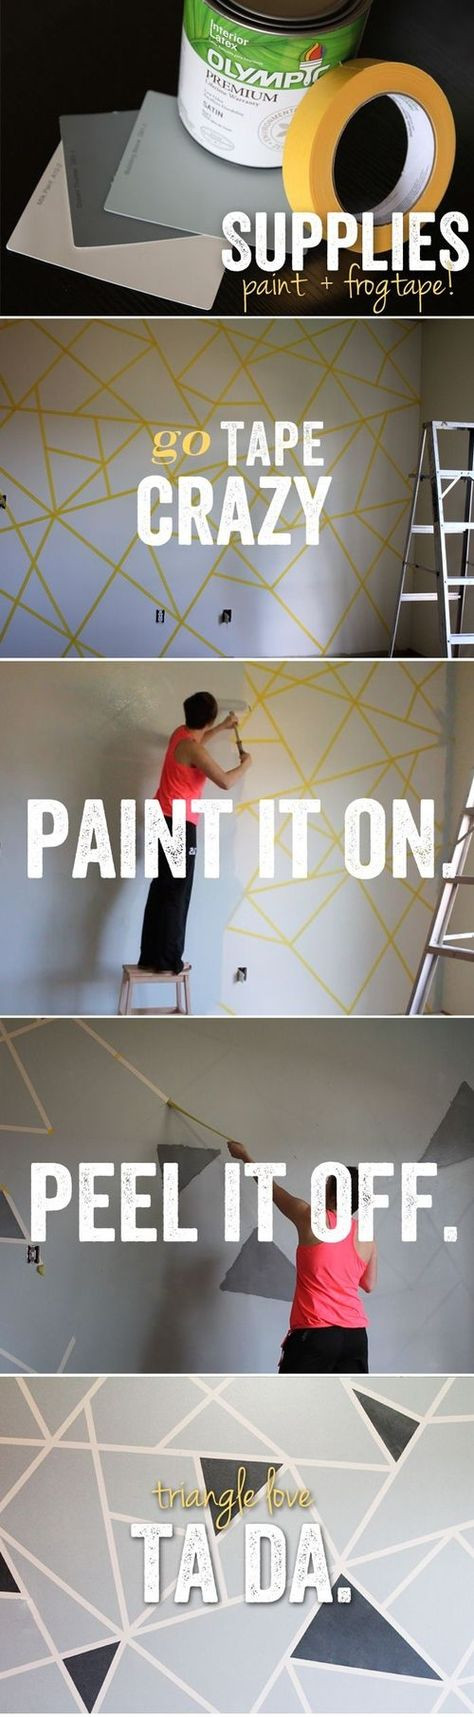 Tumblr Wall Decor DIY
 14 Tumblr Inspired DIY Crafts A Little Craft In Your Day